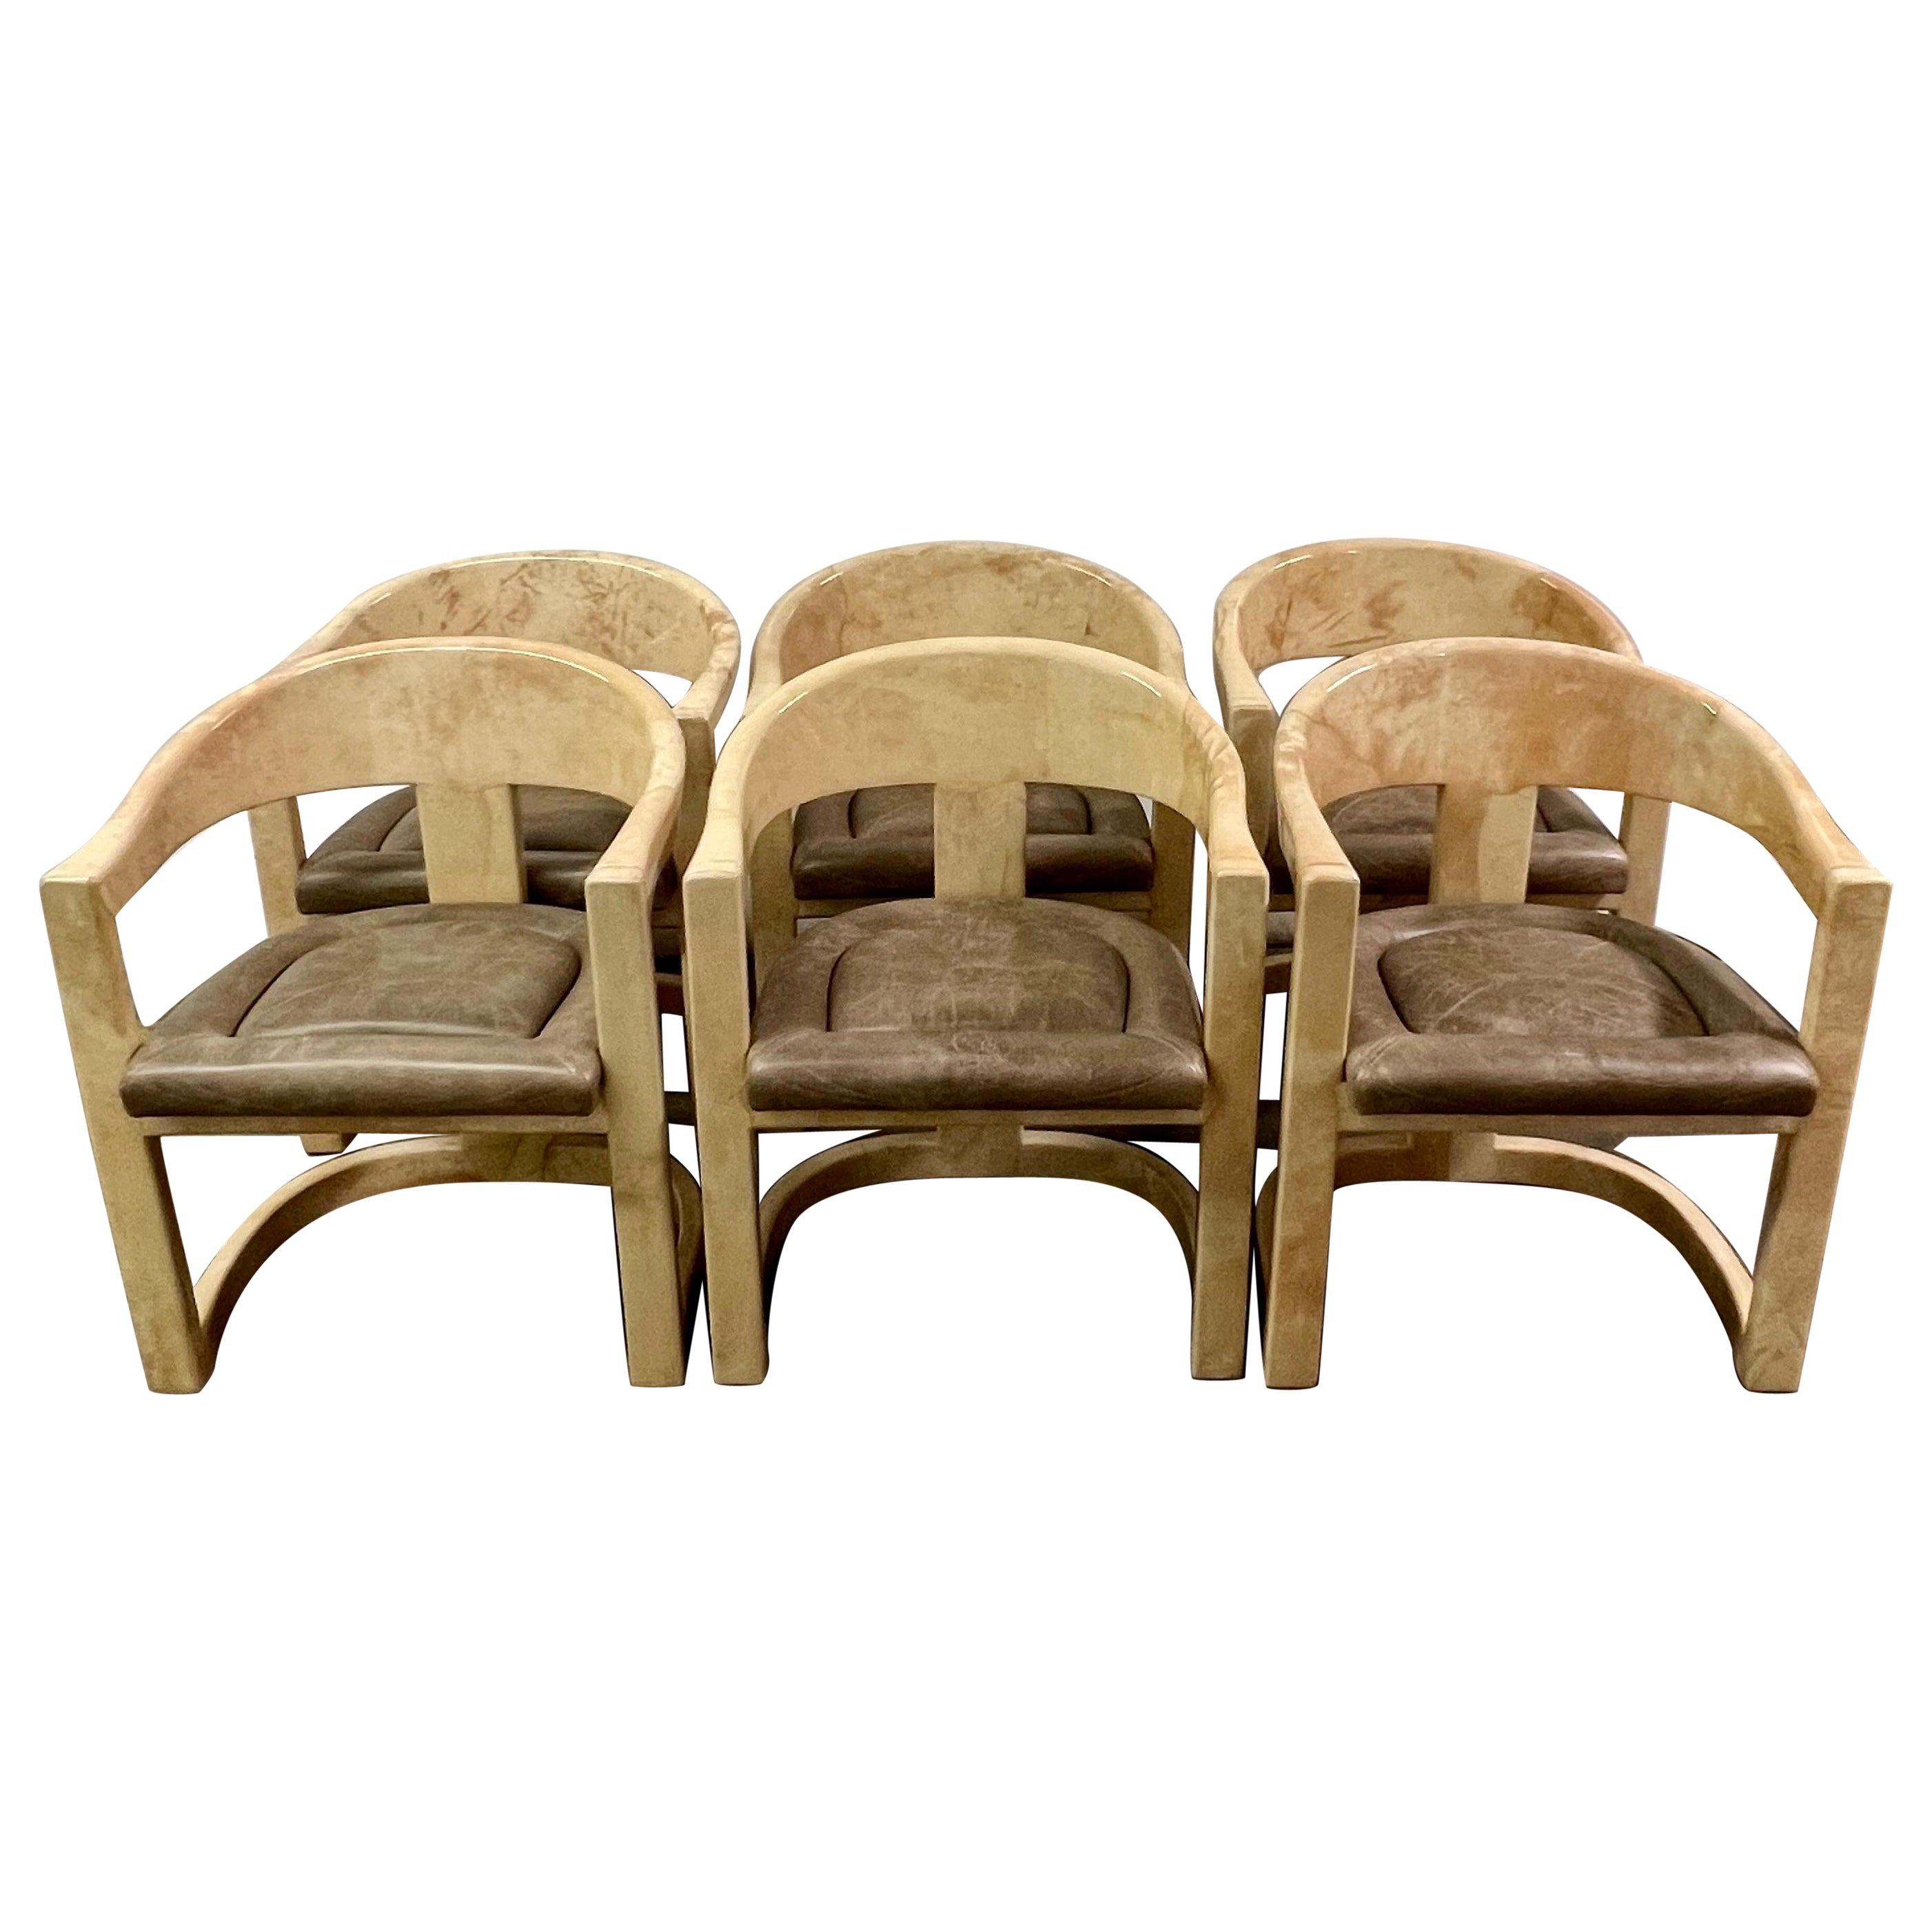 6 Karl Springer Onassis Chairs in Goatskin with Leather Seats For Sale